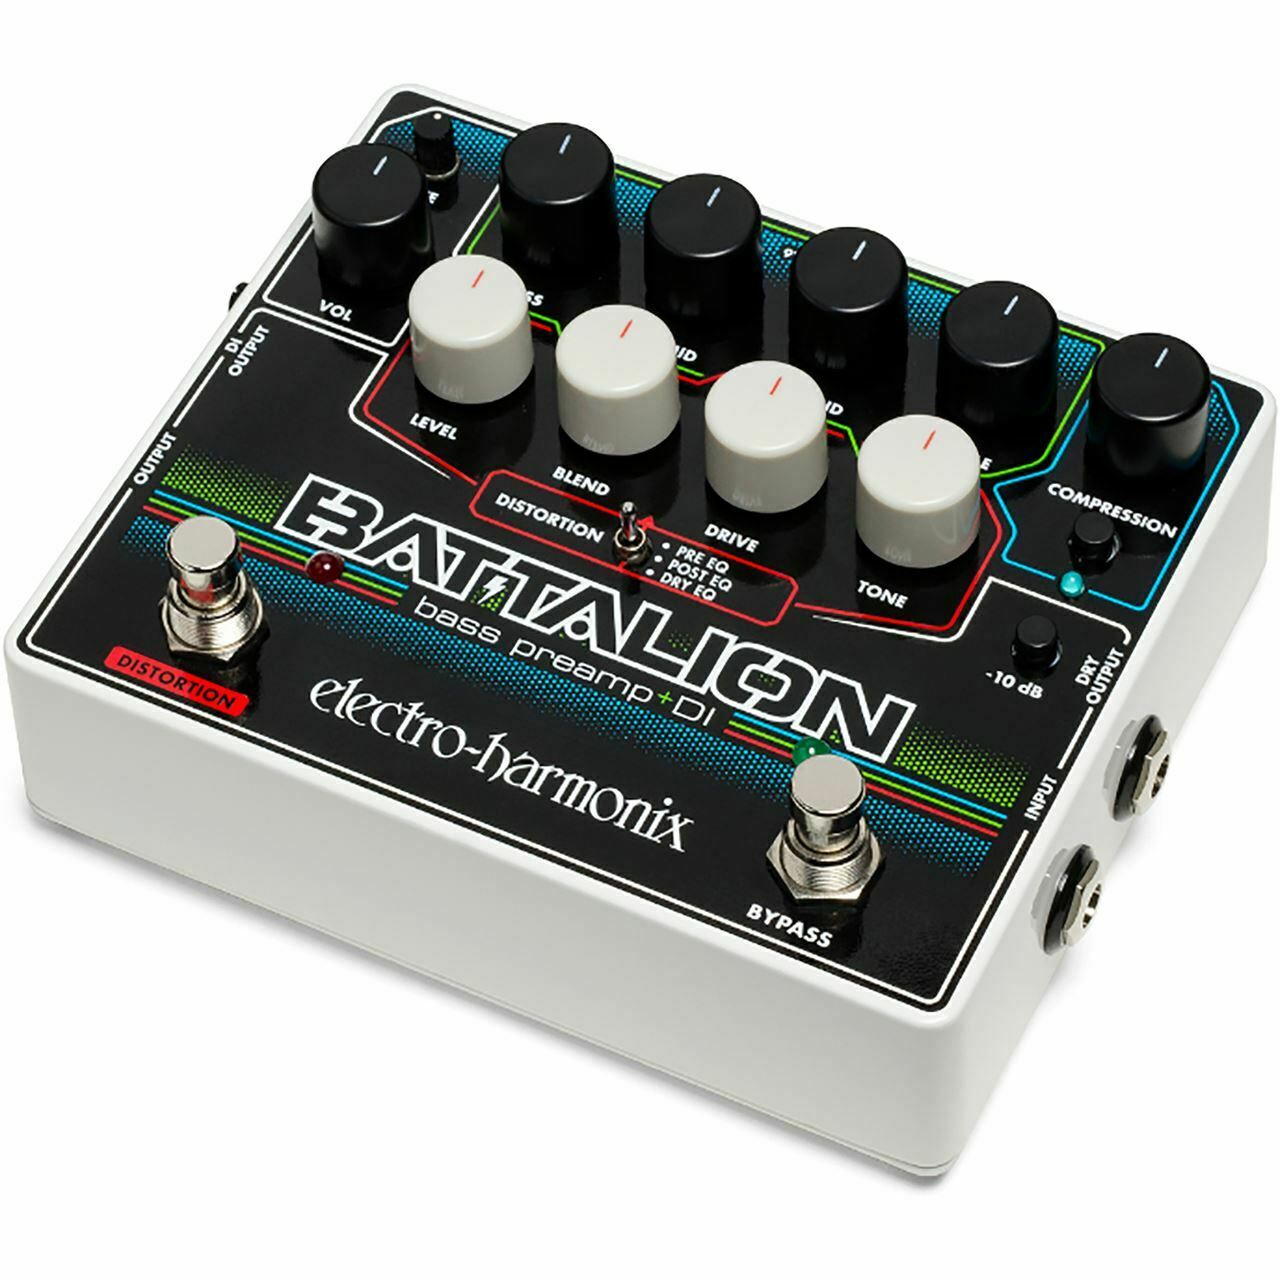 New - Electro Harmonix Battalion Bass Preamp and DI Effects Pedal